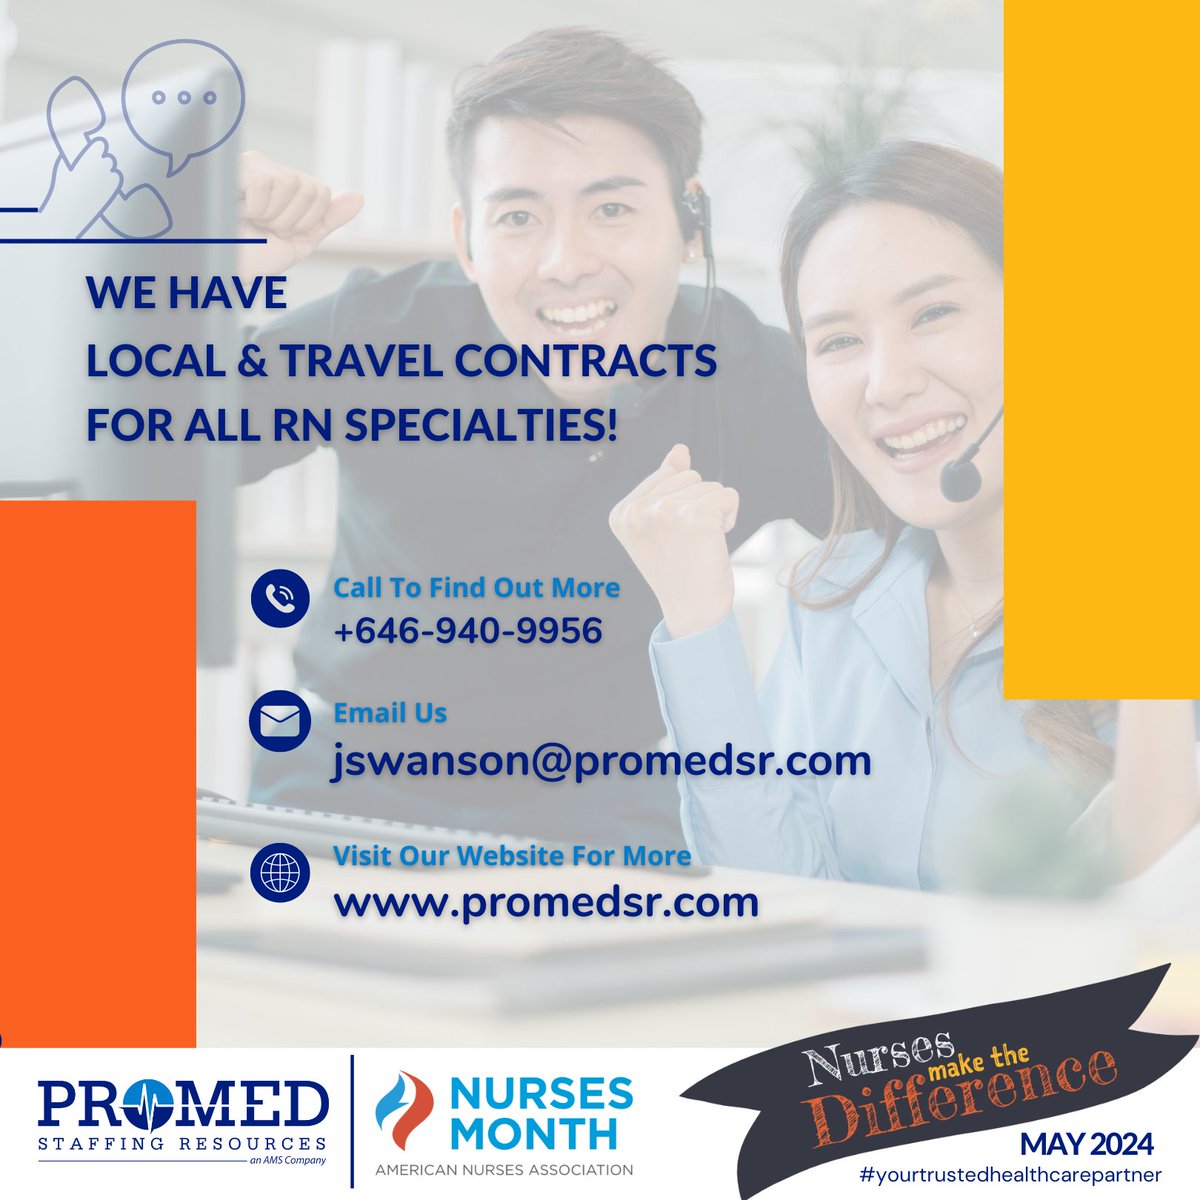 Are you an #RN looking for top pay and unparalleled opportunities in #travelnursing? Reach out to Jessica at (646) 940-9956 or jswanson@promedsr.com today.

#travelnurse #nurse #travelrn #hiring #hiringalert #nurselife #travelnursejobs #travelrnjobs #workandtravel #promedsr